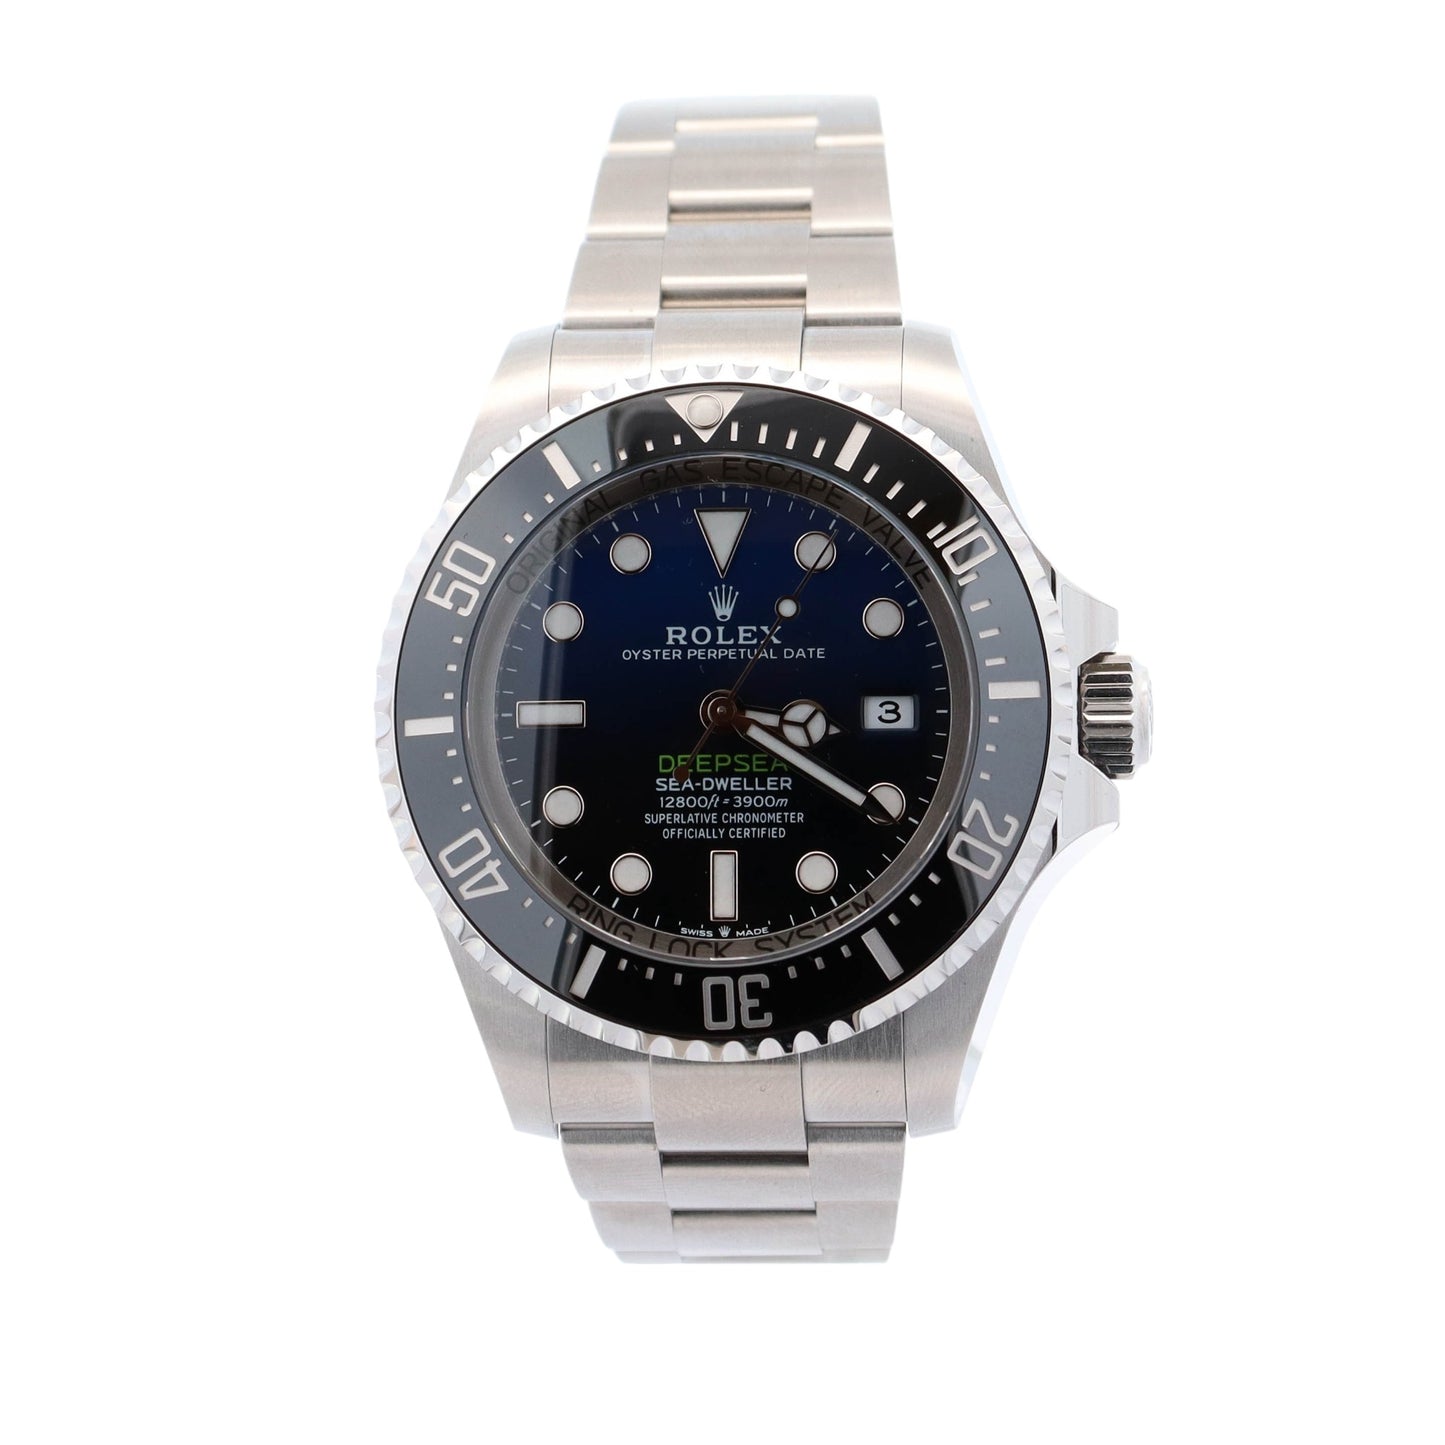 Rolex Sea-Dweller Deepsea "James Cameron" Stainless Steel 44mm Blue/Black Dot Dial Watch Reference# 136660